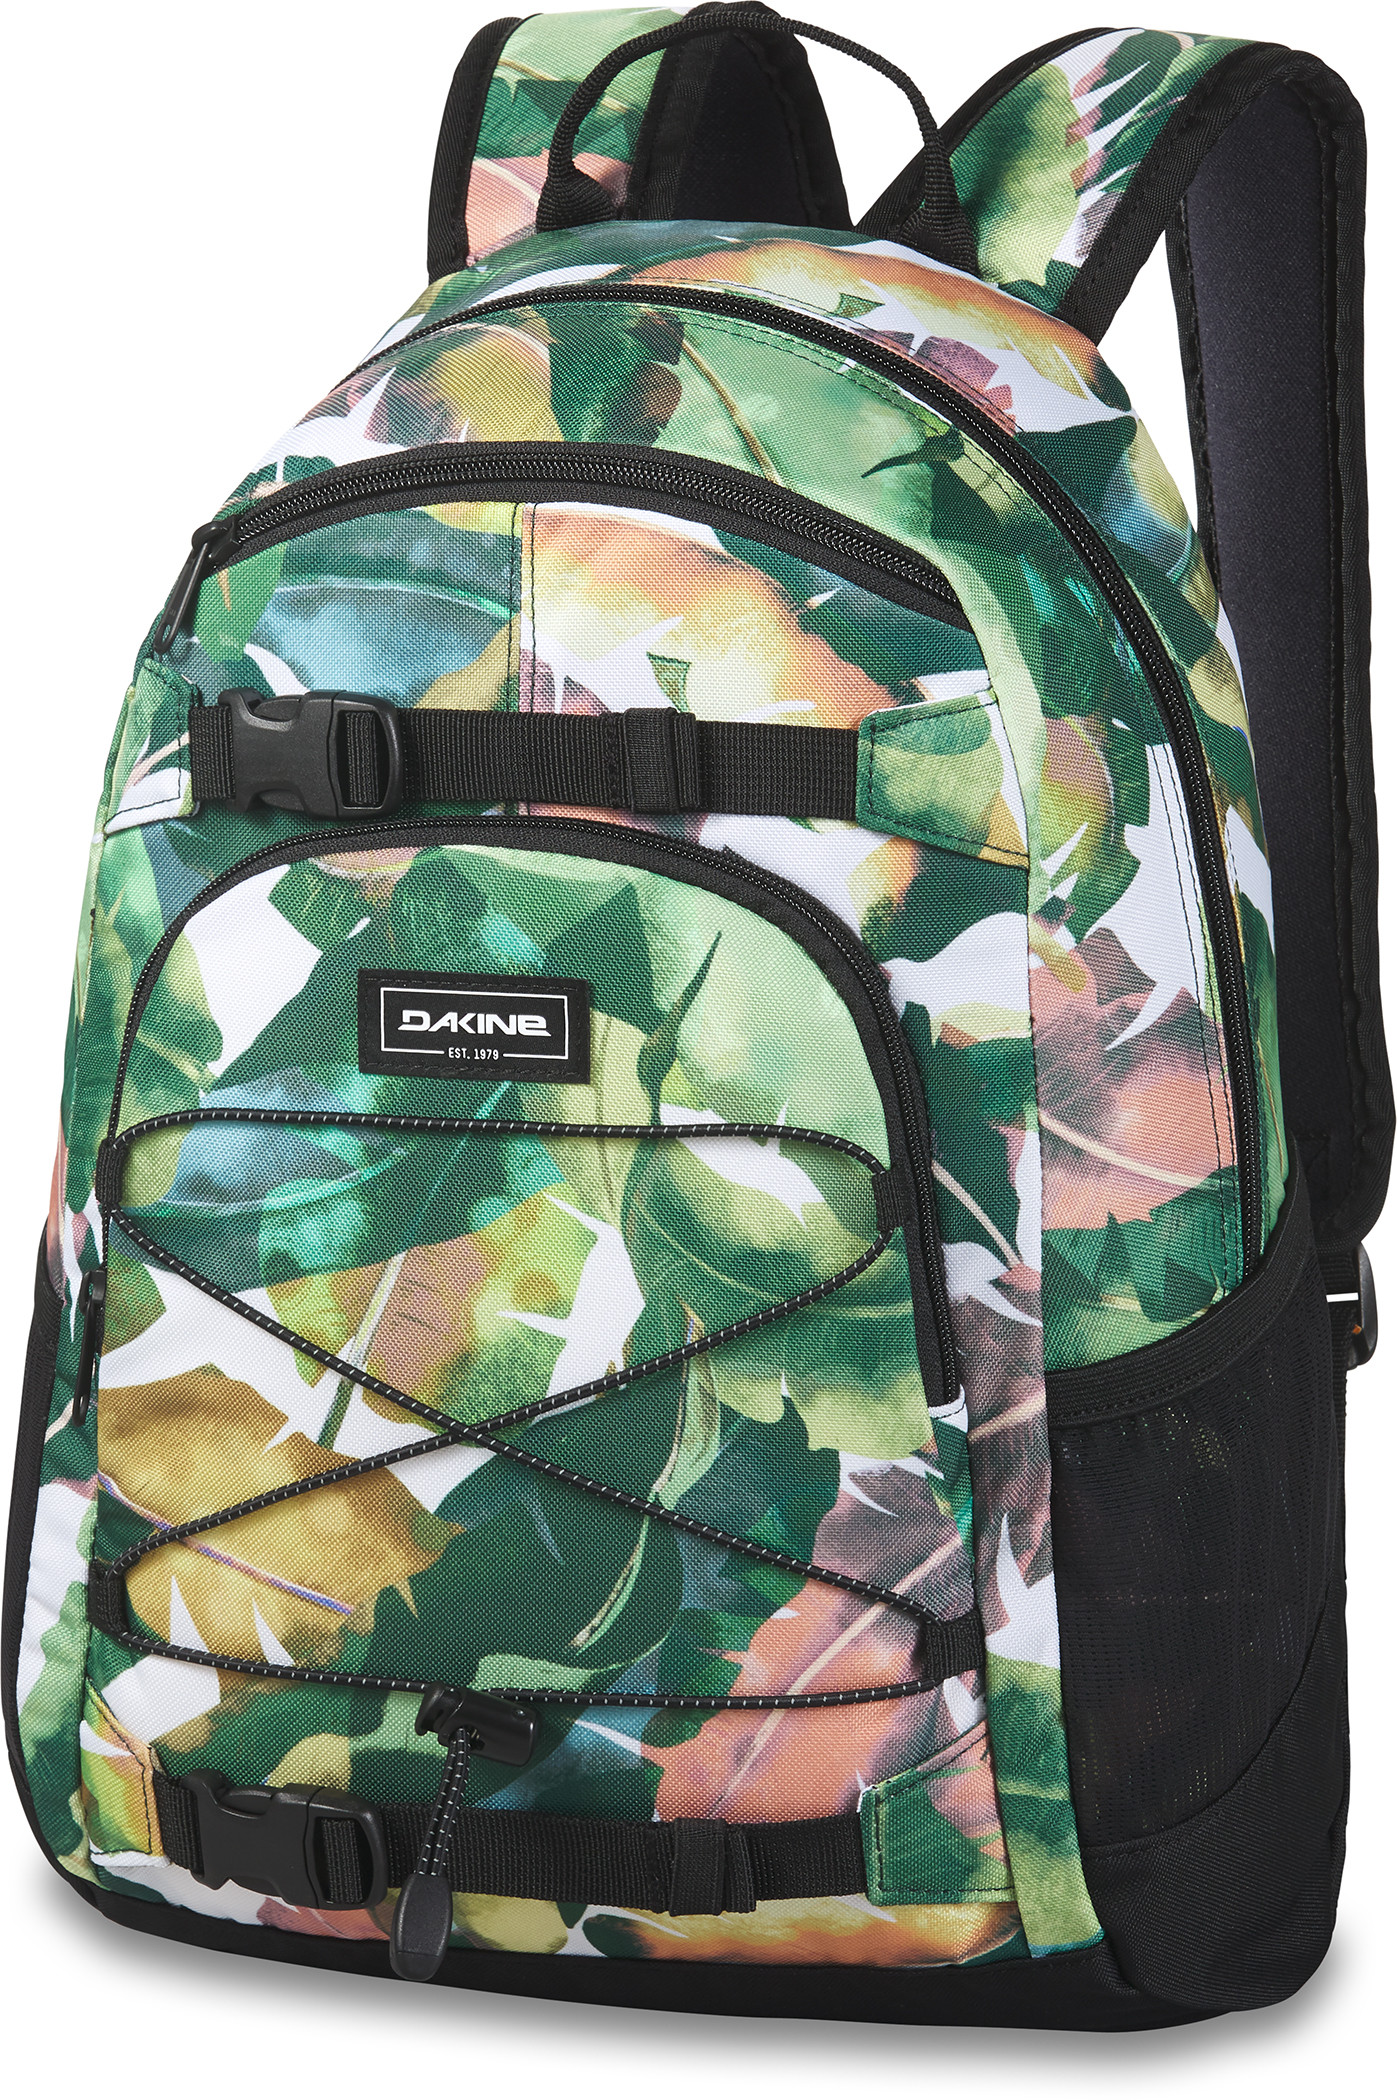 Grom 13L Backpack